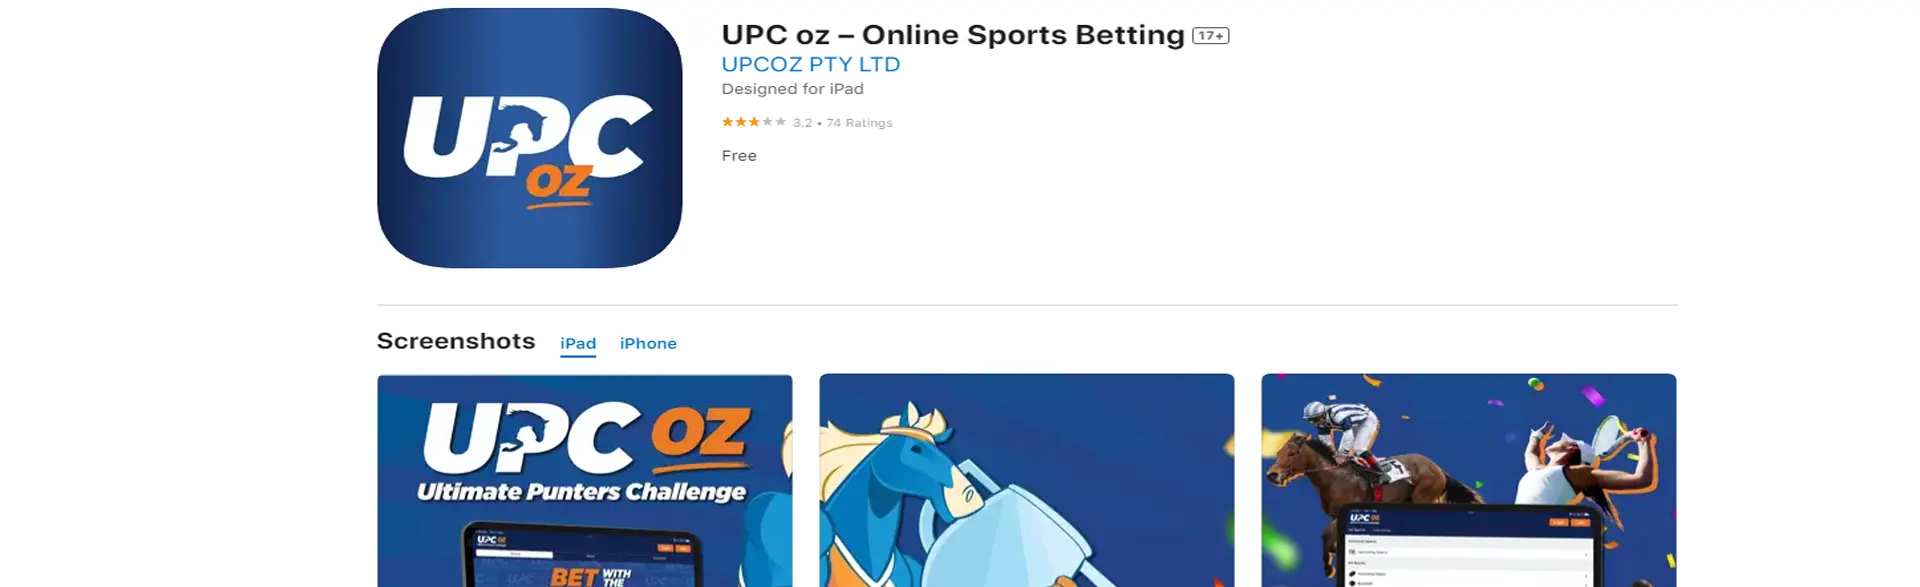 Page for downloading the UPCoz app for sports betting.